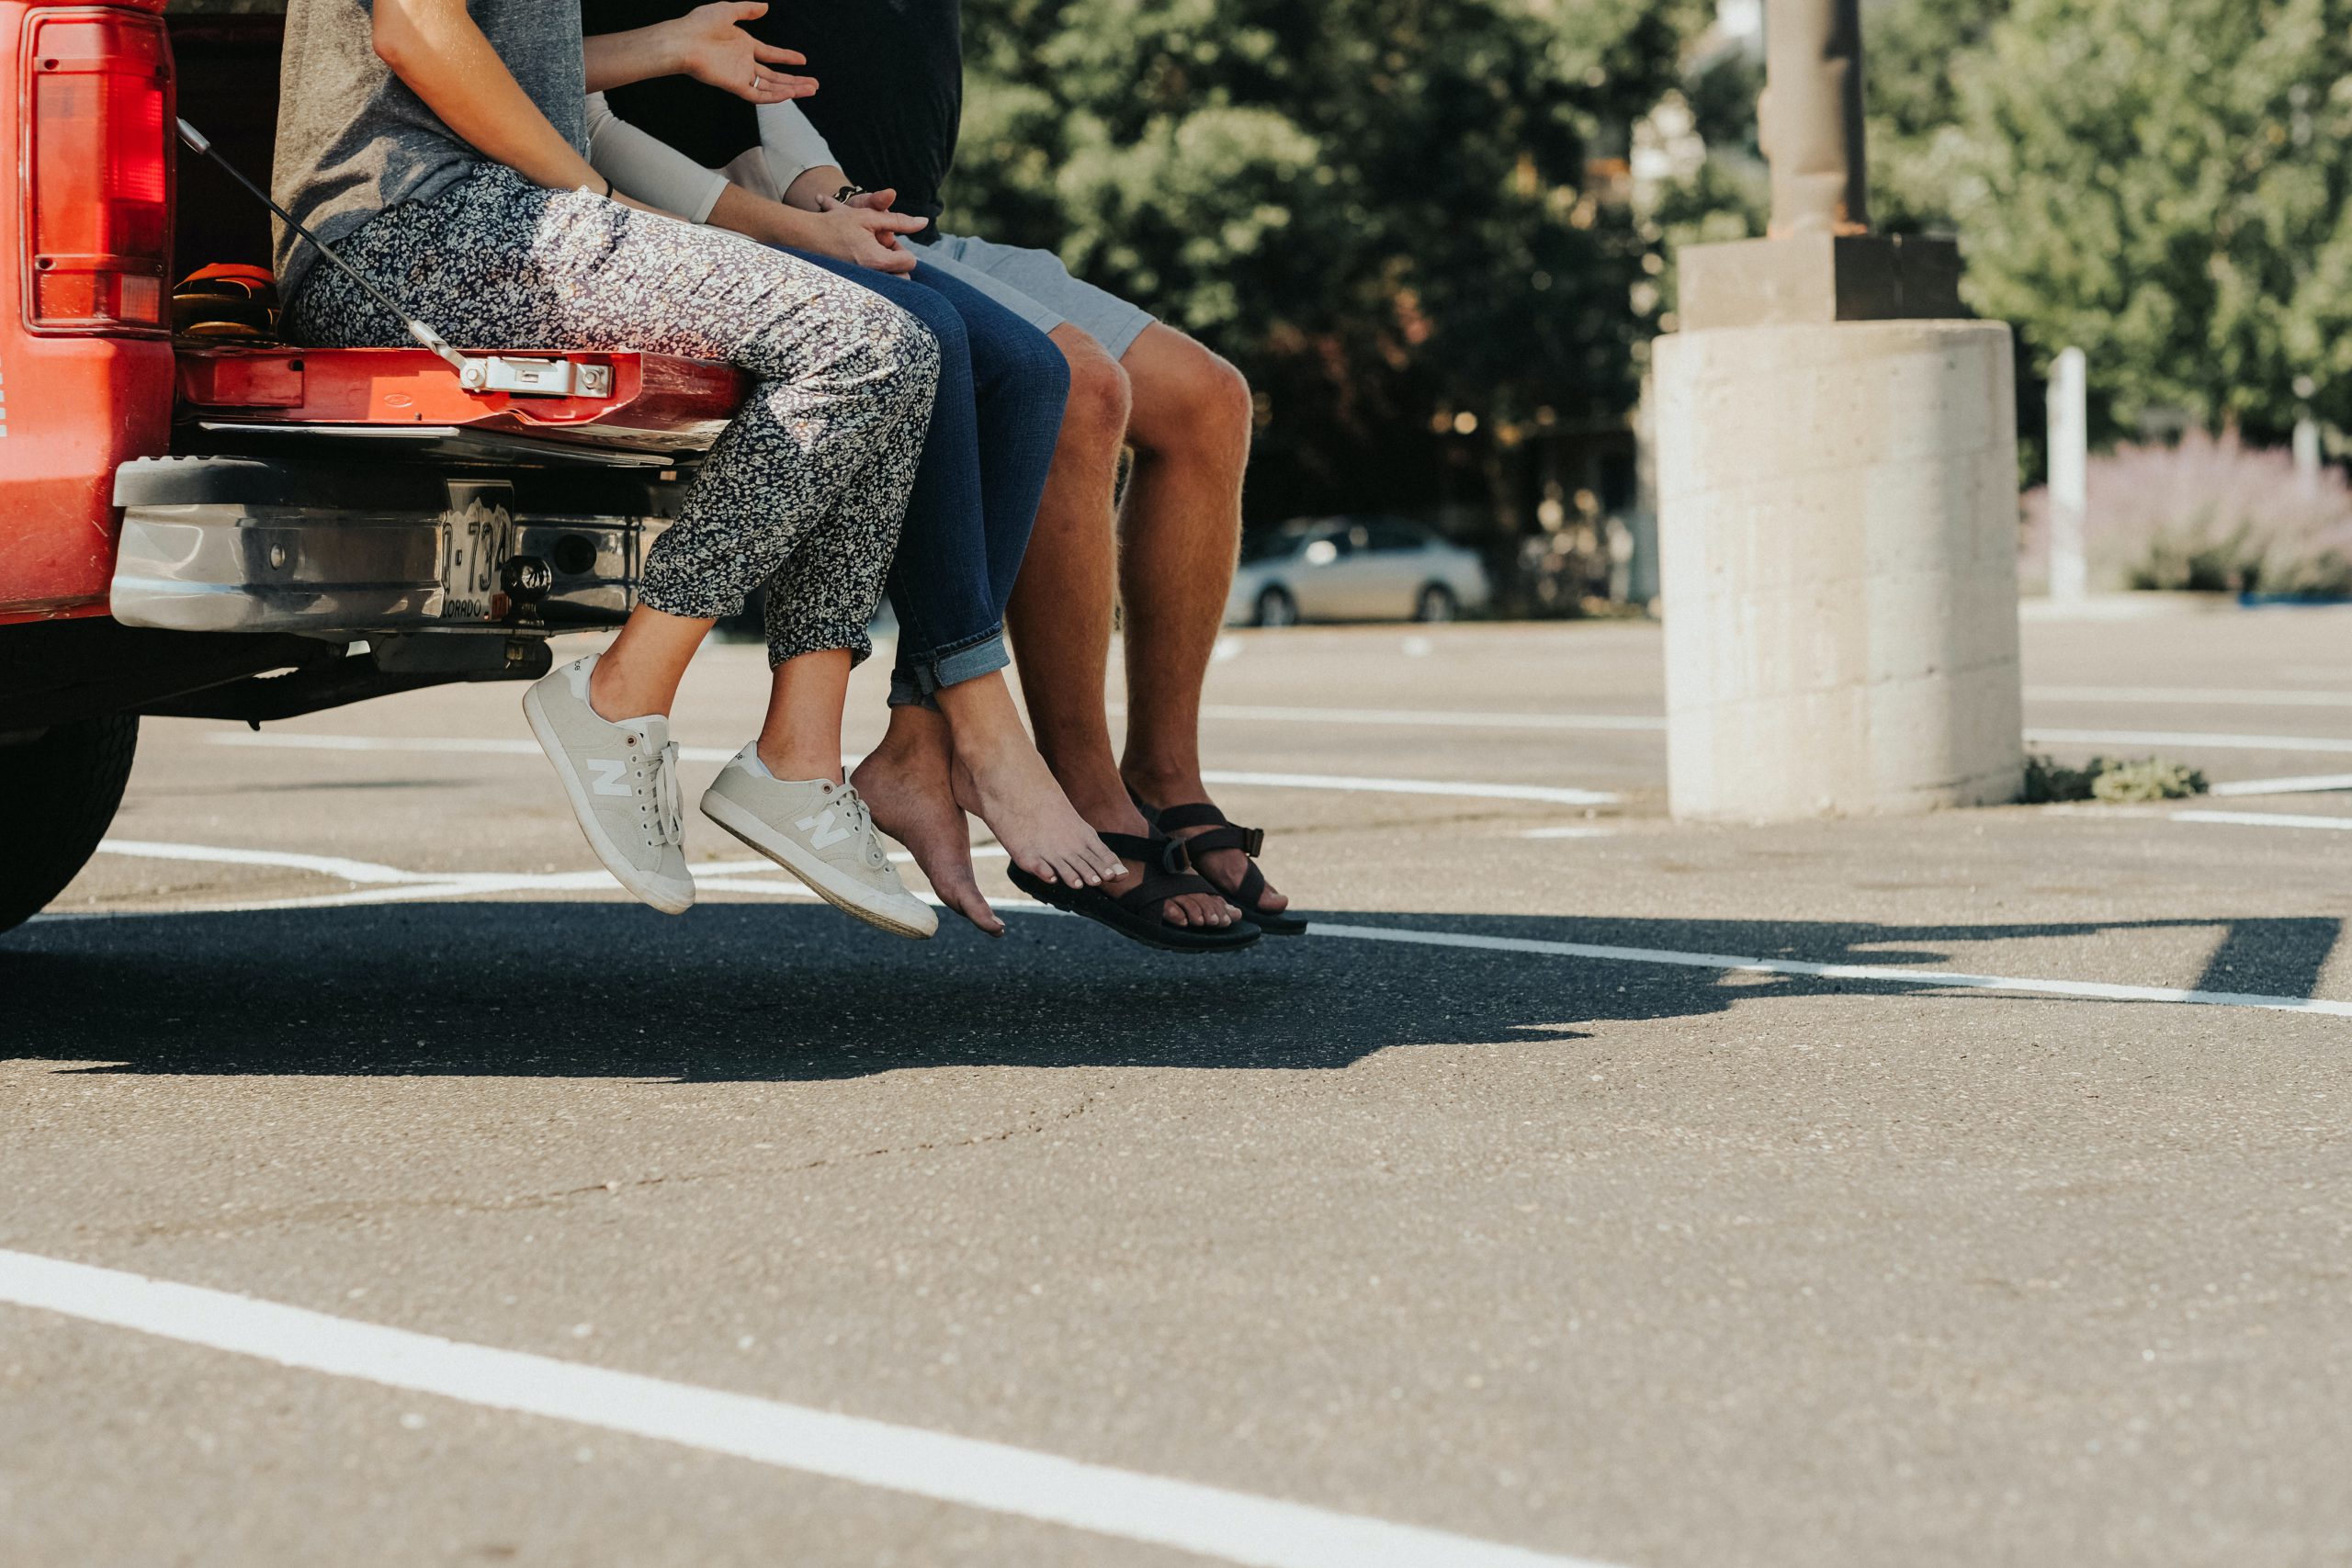 three people sat on the edge of a vehicle's boot in an empty car park, with only their torsos-down visible.